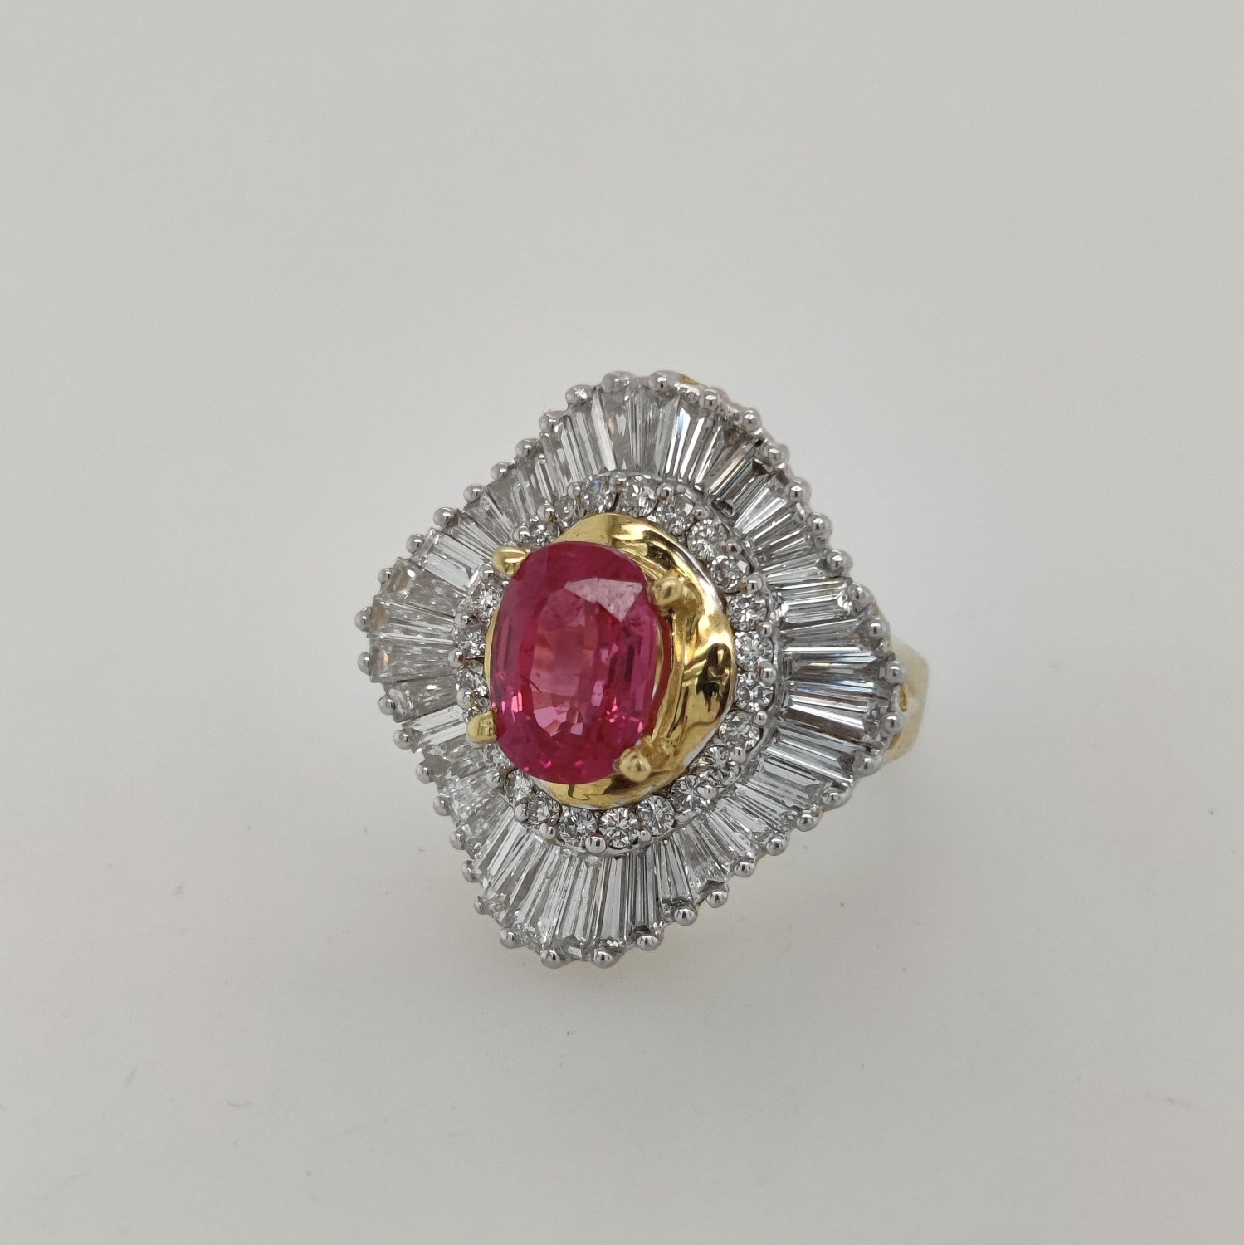 18k Yellow Gold Ruby Ring with Round Diamonds and Diamond Baguette Halo Size 5.5

Ruby Weighs Approximately 2.25CT
Diamonds Weigh Approximately 5.5 CTTW; G-H/VS1-2